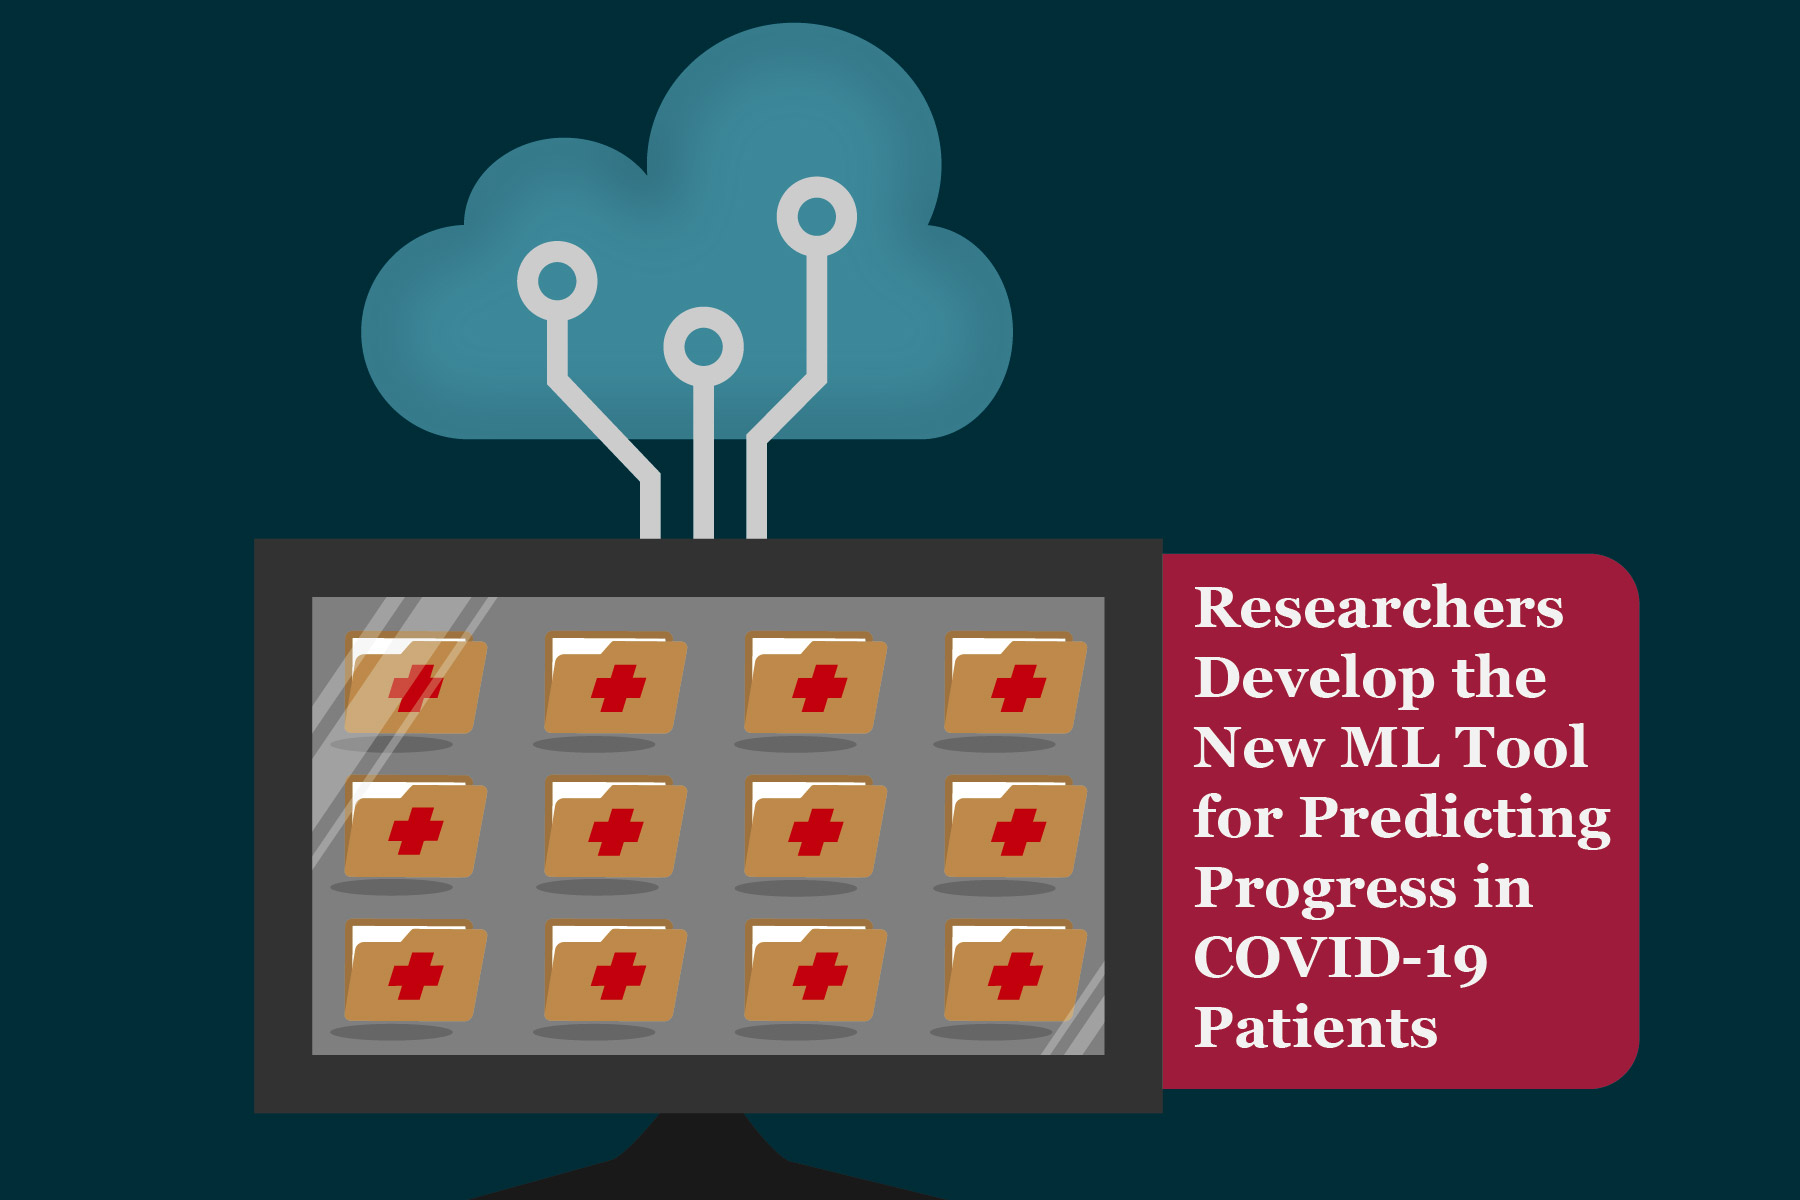 Researchers Develop the New ML Tool for Predicting Progress in COVID-19 Patients